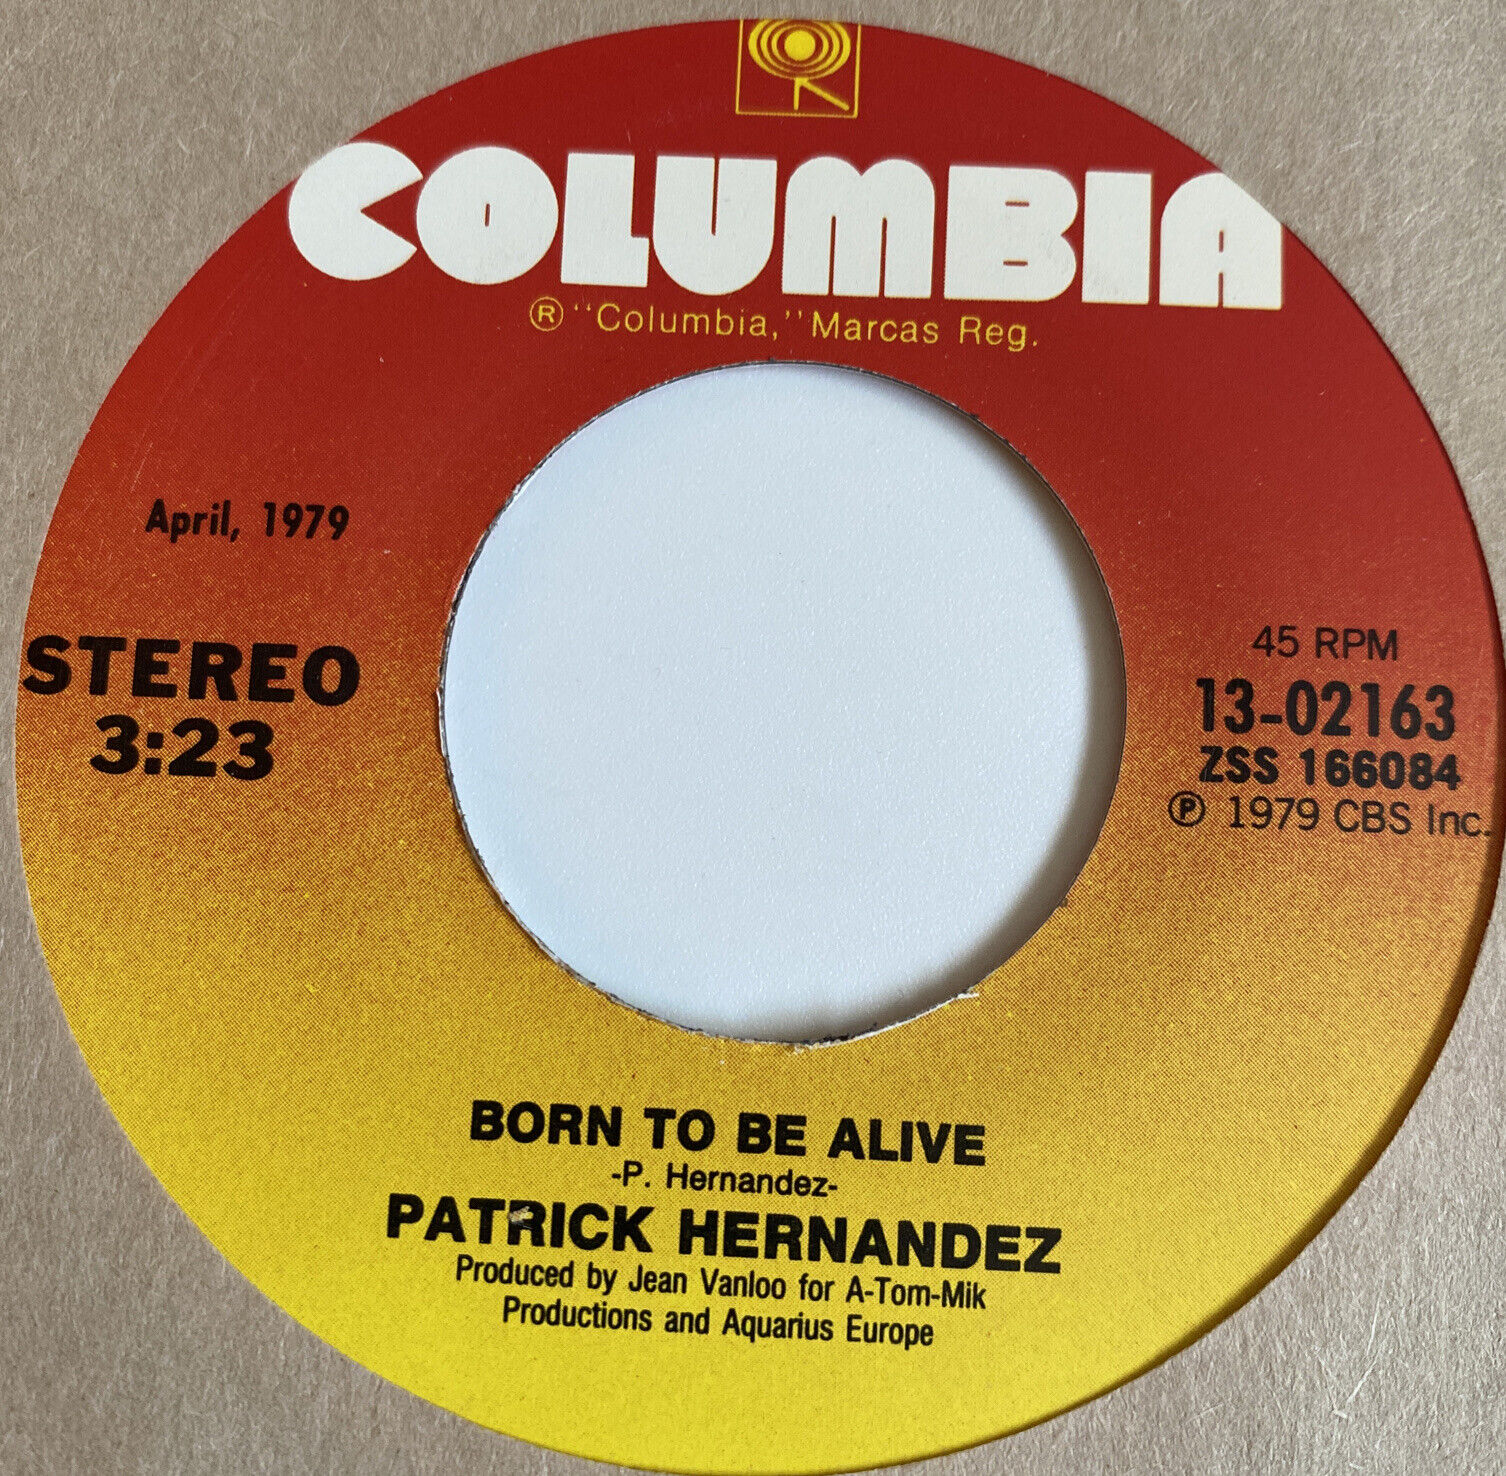 Patrick Hernandez 45 Born to be Alive / Too Many People NEW reissue unplayed